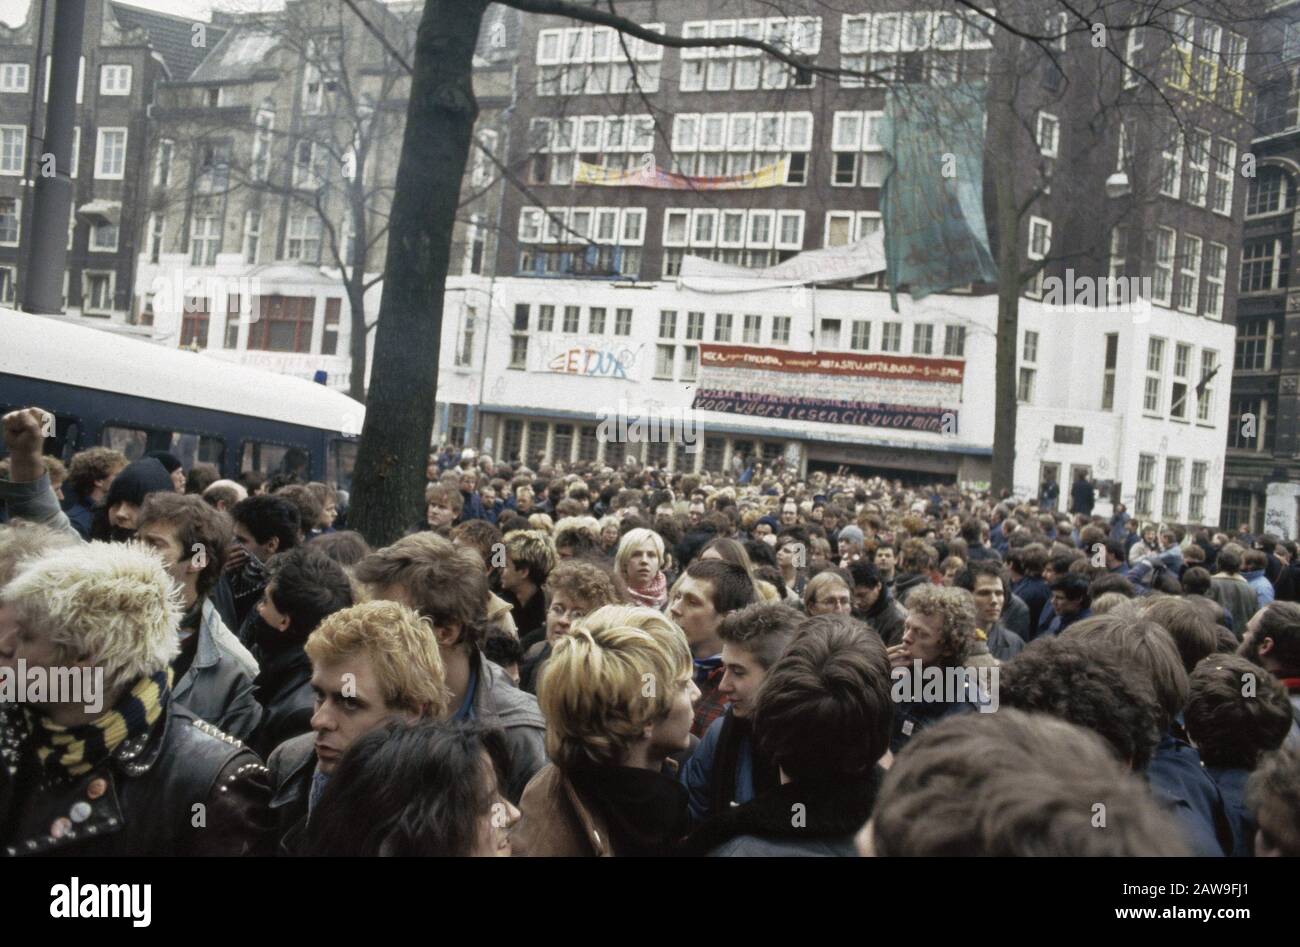 Clearance cracking complex Wyers in Amsterdam; activists and residents leave en masse the premises Date: February 14, 1983 Location: Amsterdam, Noord-Holland Keywords: squats, evictions Institution Name: Wyers Stock Photo